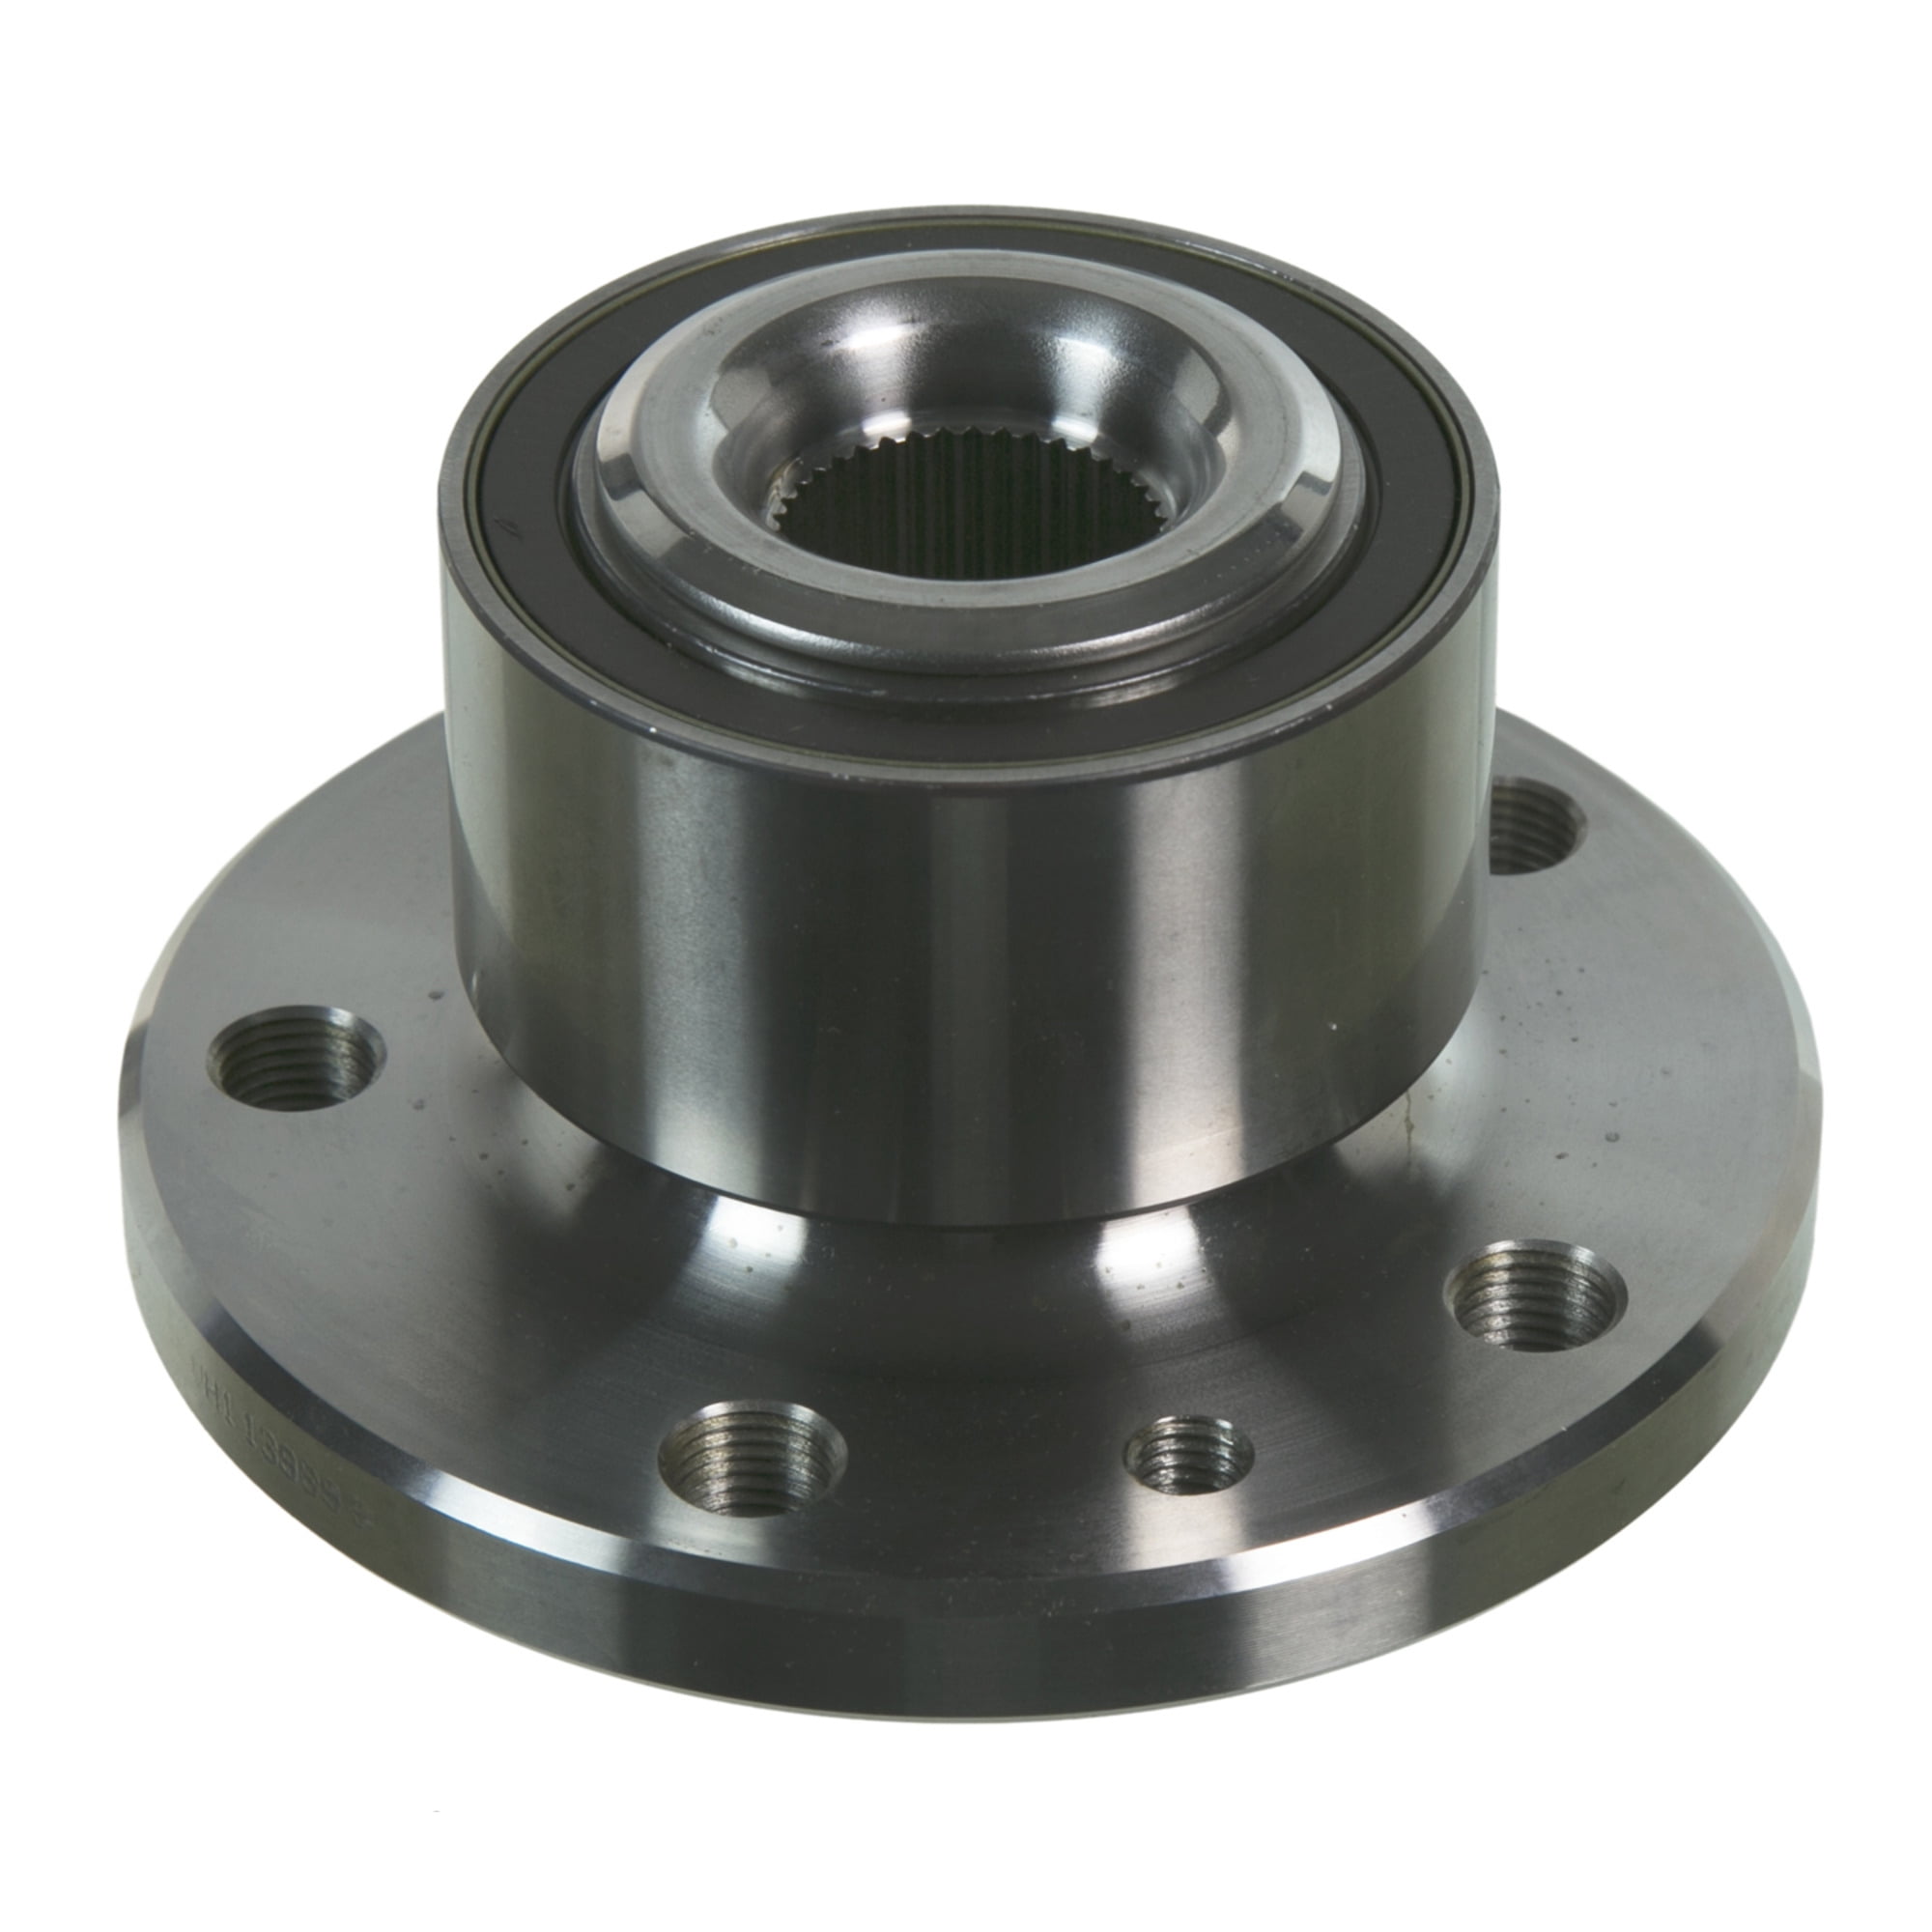 Stable Dust-Proof Bushing Bearing LM16LUU High Sensitivity Linear-Motion Bearing for Industrial Automation Machine Tools 